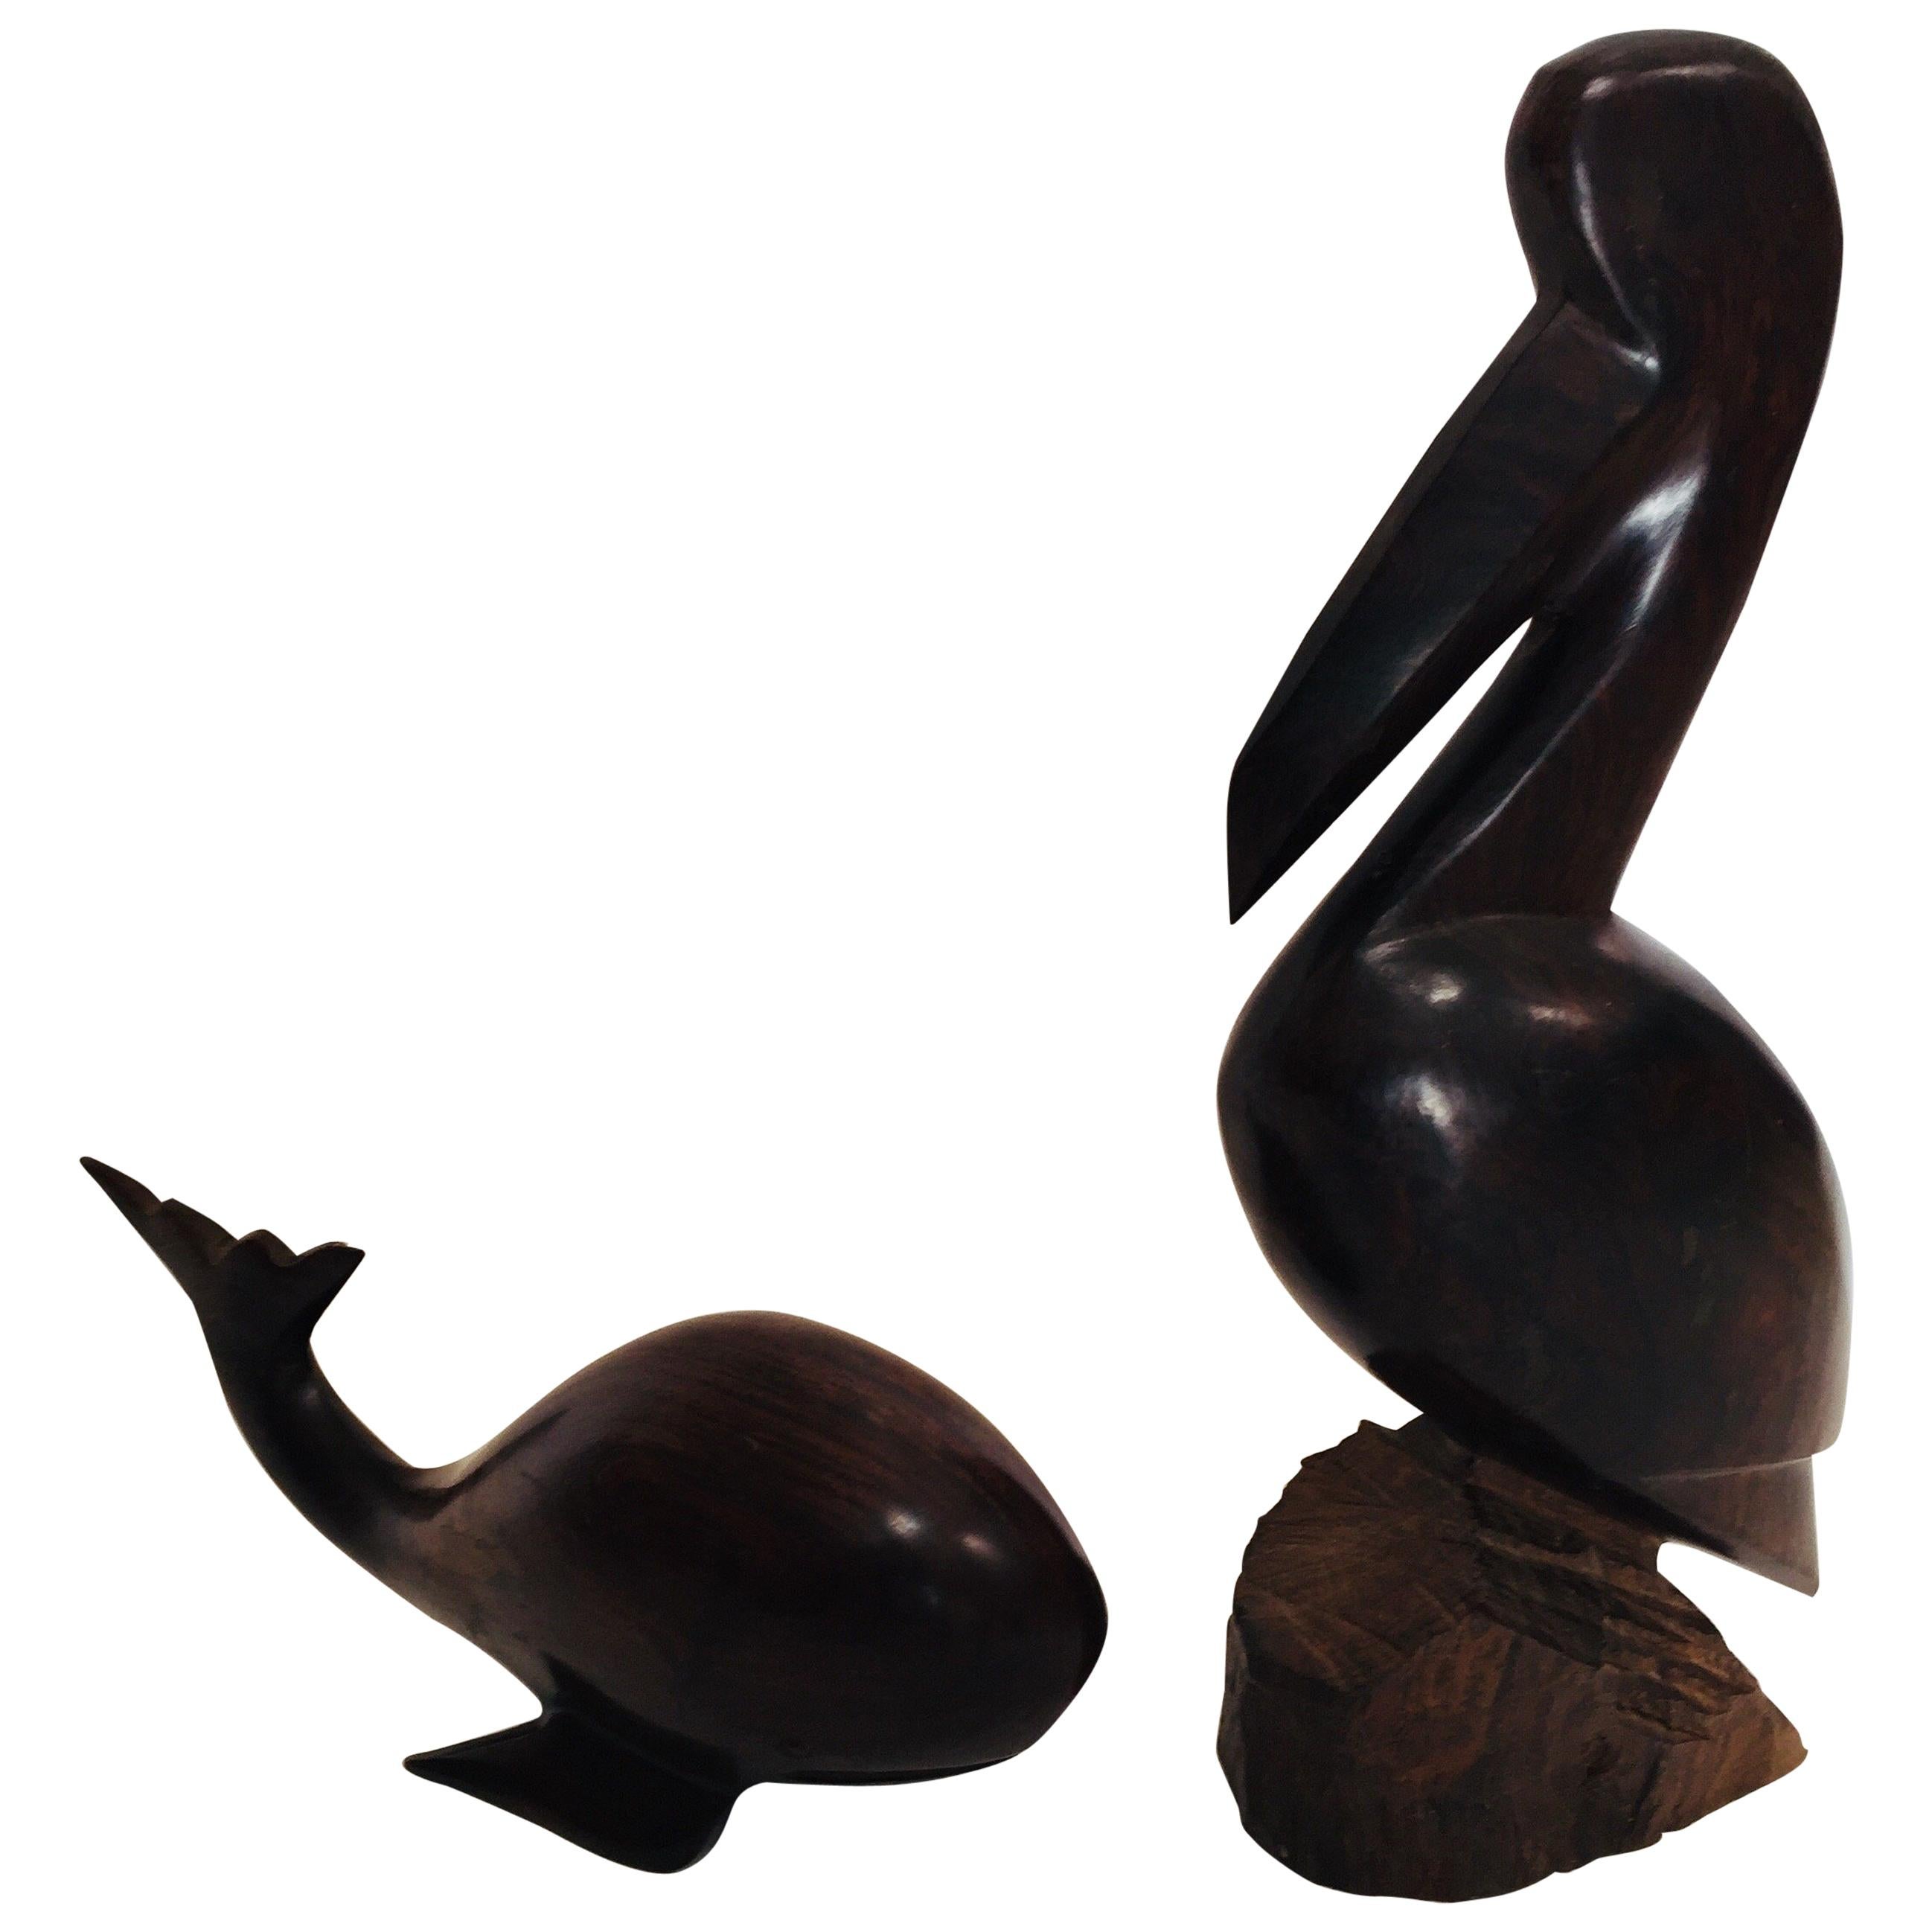 Seri Ironwood Animal Sculptures of a Pelican and a Whale